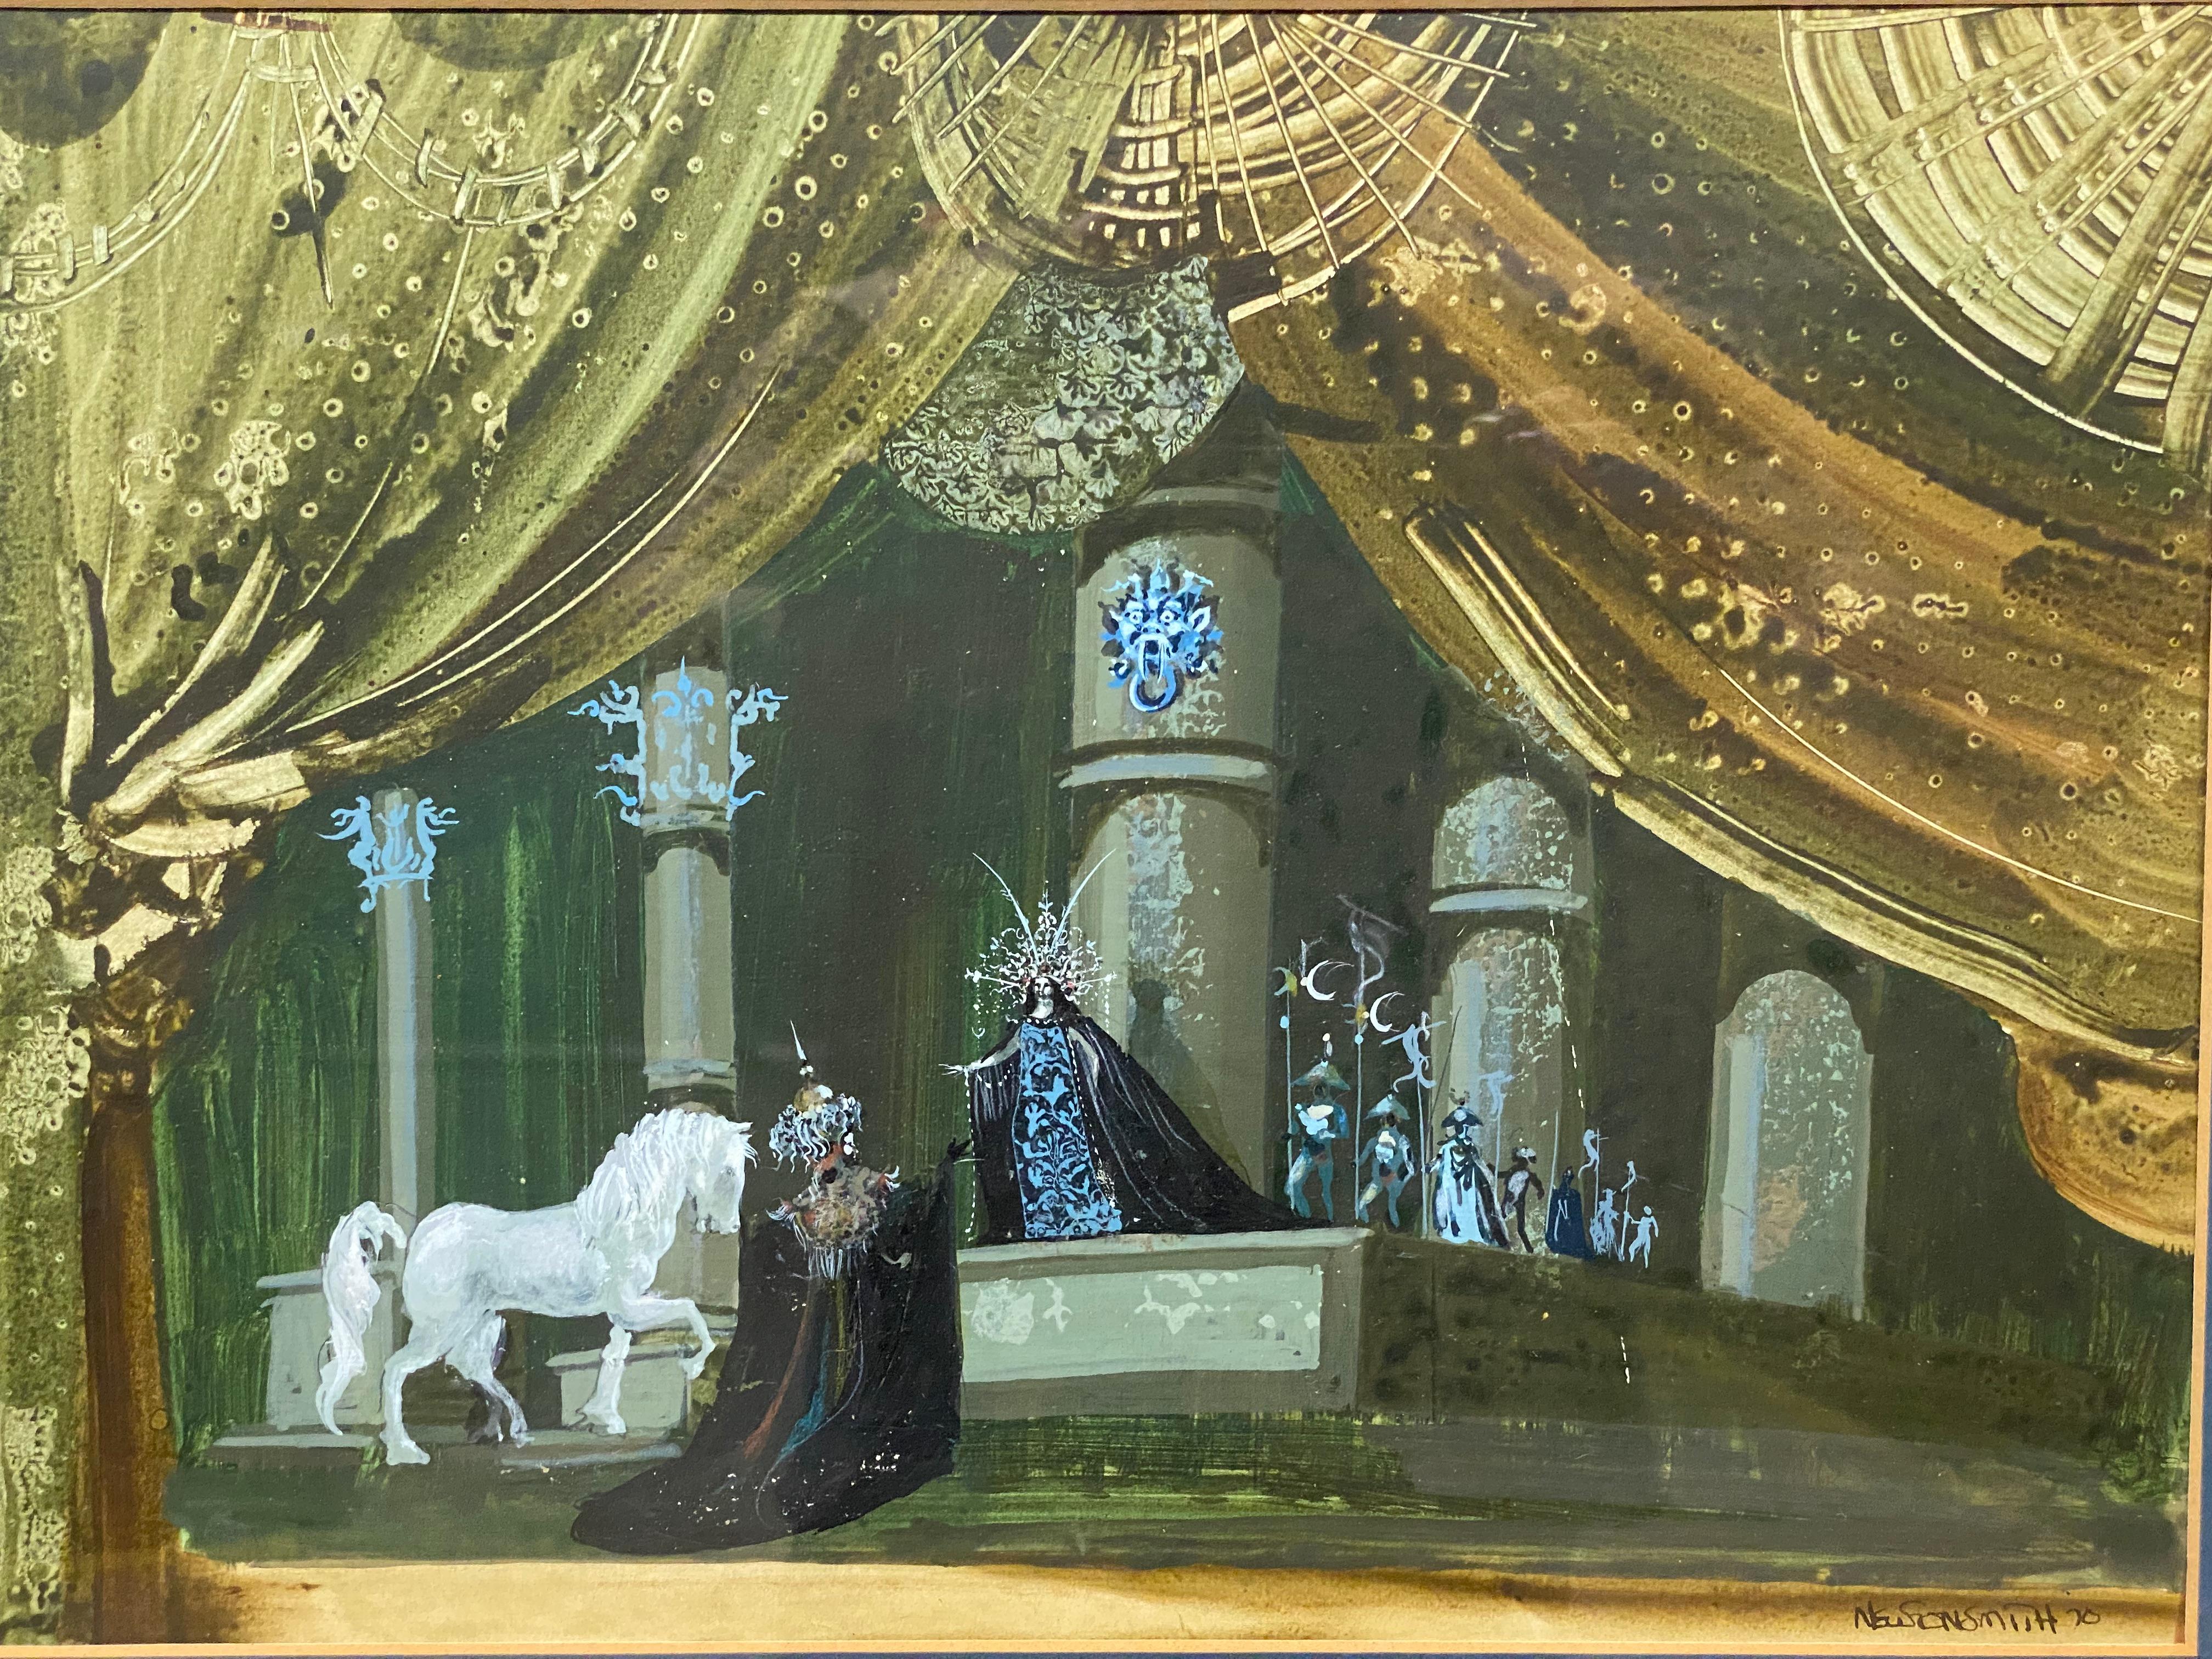 Wonderfully detailed and dramatic set design gouache and watercolor painting in the manner of the famous set designer, Oliver Smith. Colorful and vibrant stage pageantry. This work has everything from architecture, costumes, procession, drapery and